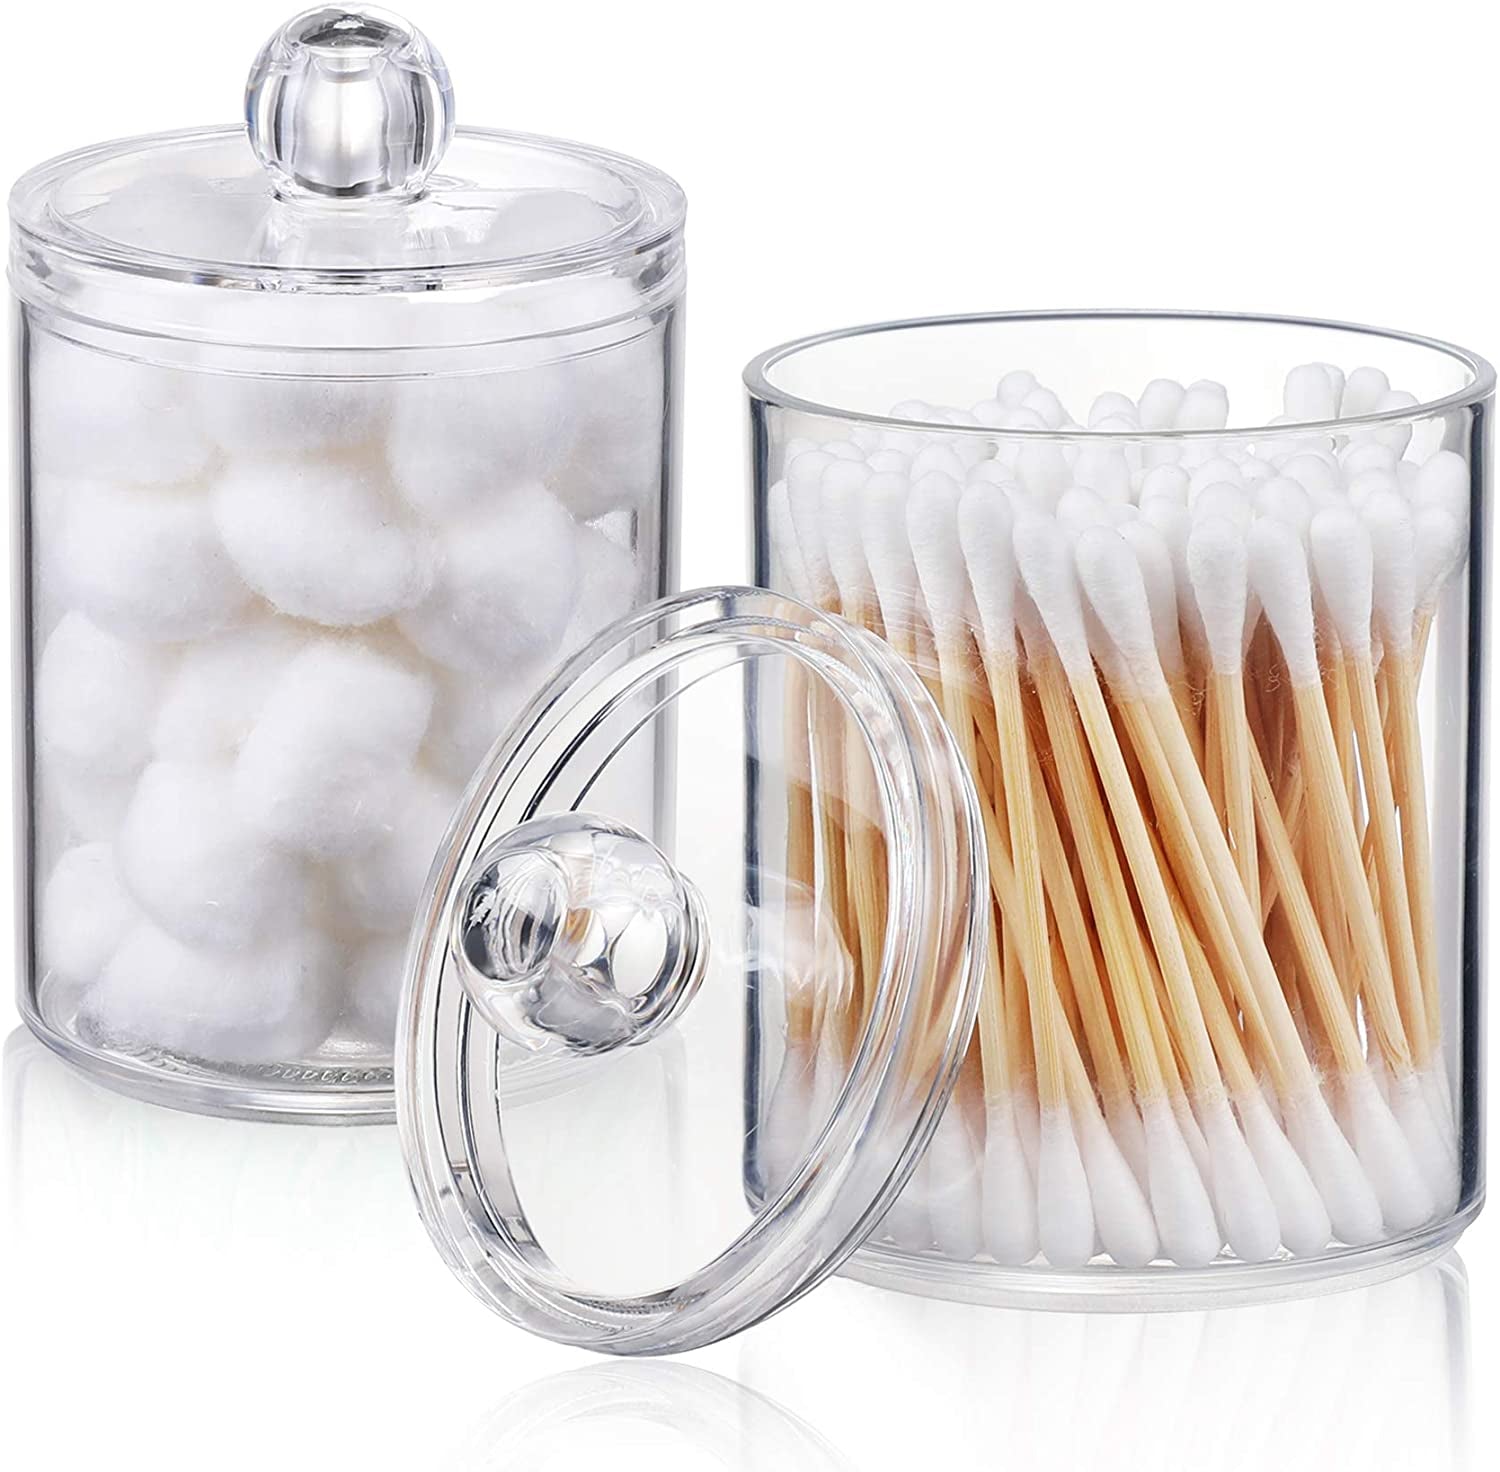 4 PACK Qtip Holder Dispenser for Cotton Ball, Cotton Swab, Cotton round Pads, Floss Picks - 10 Oz Clear Plastic Apothecary Jar Set for Bathroom Canister Storage Organization, Vanity Makeup Organizer